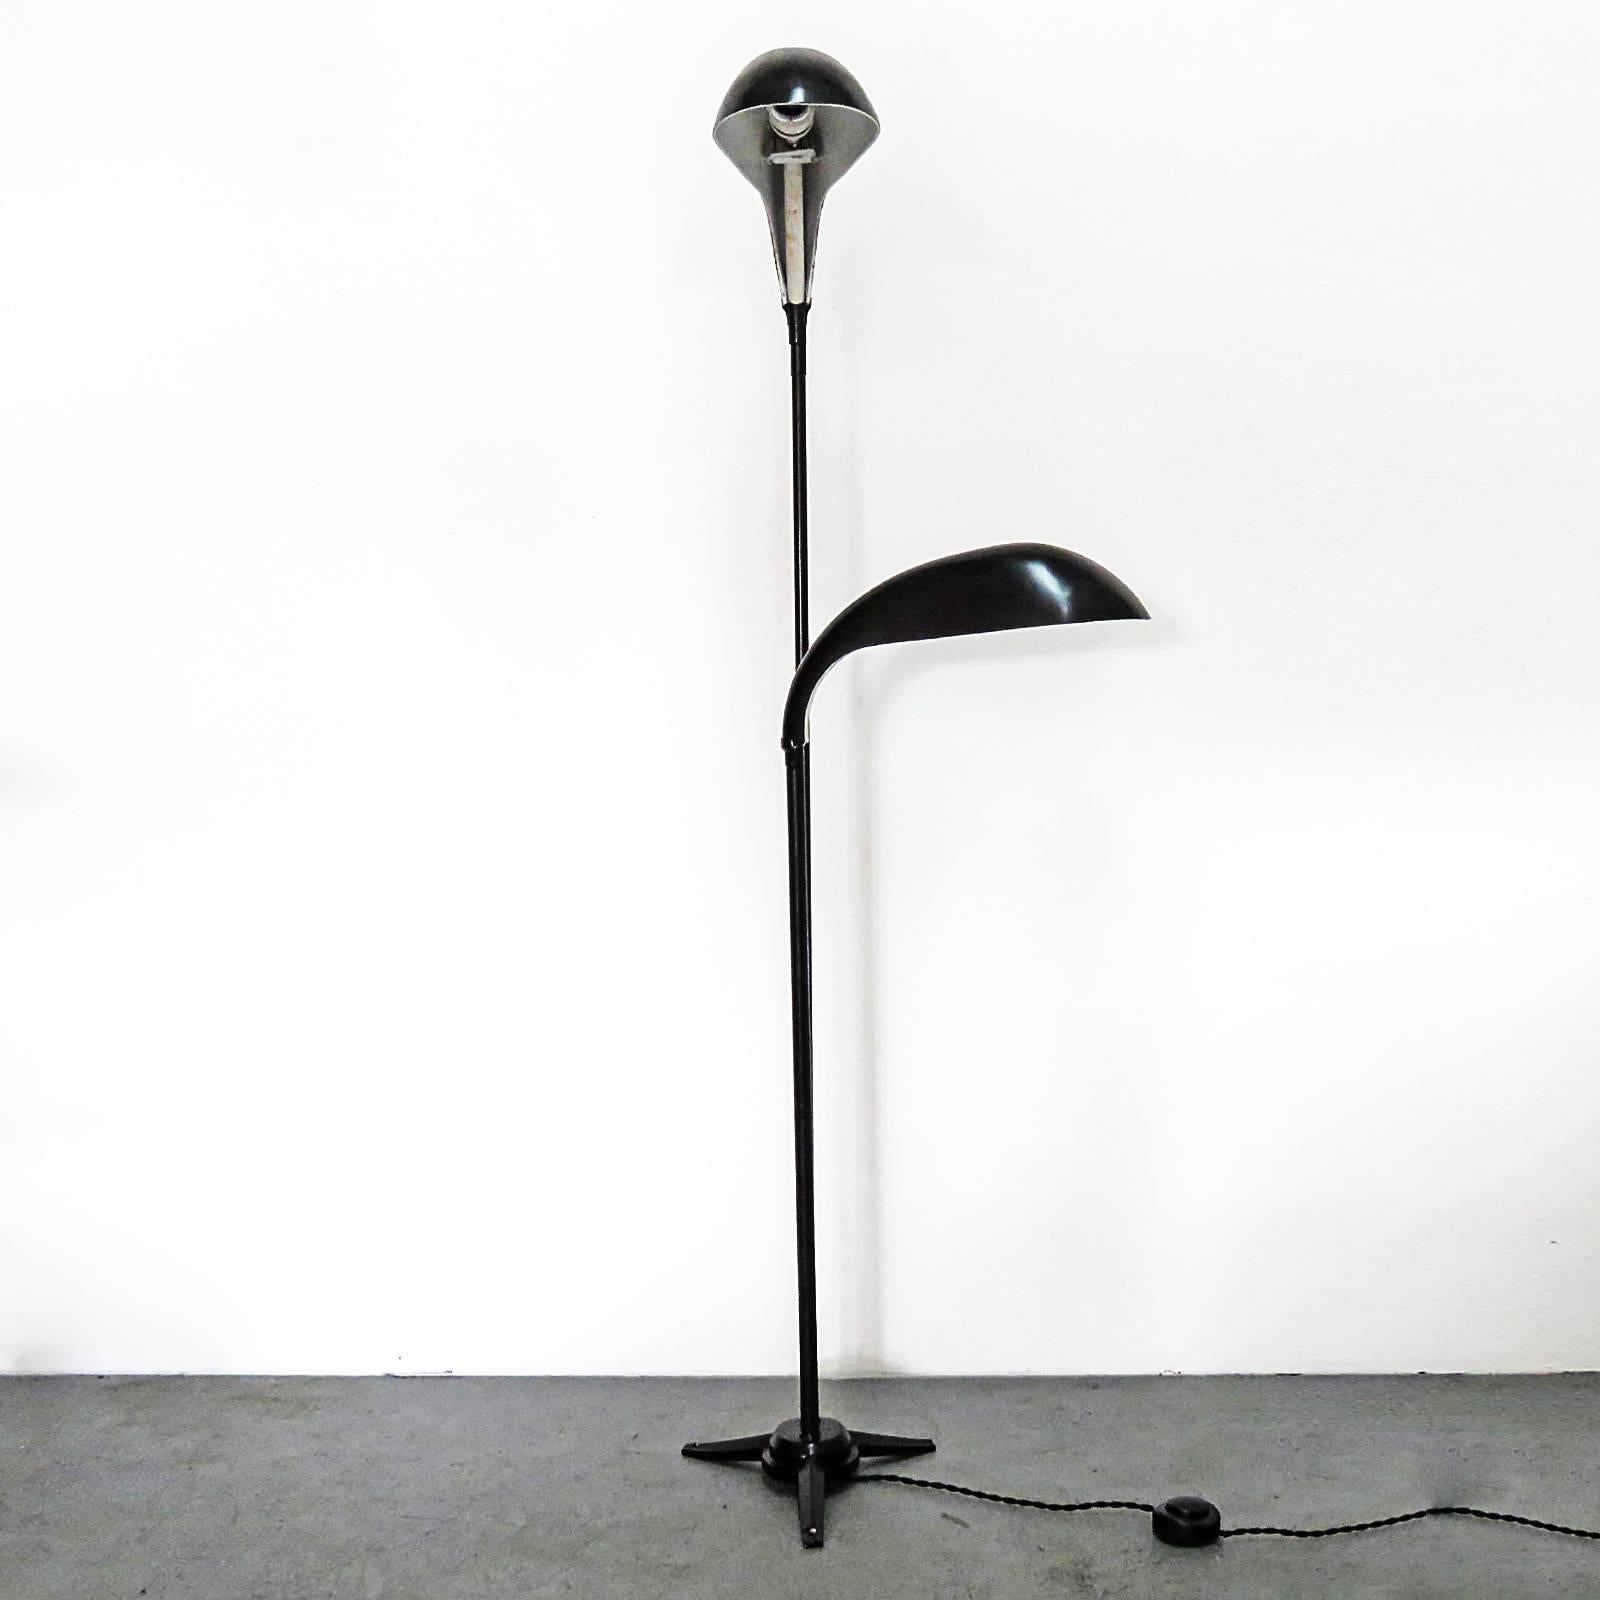 Unusual French double arm floor lamp by Lita, attributed to Jacques Biny in black and white enameled metal, the higher arm has limited telescopic function (6